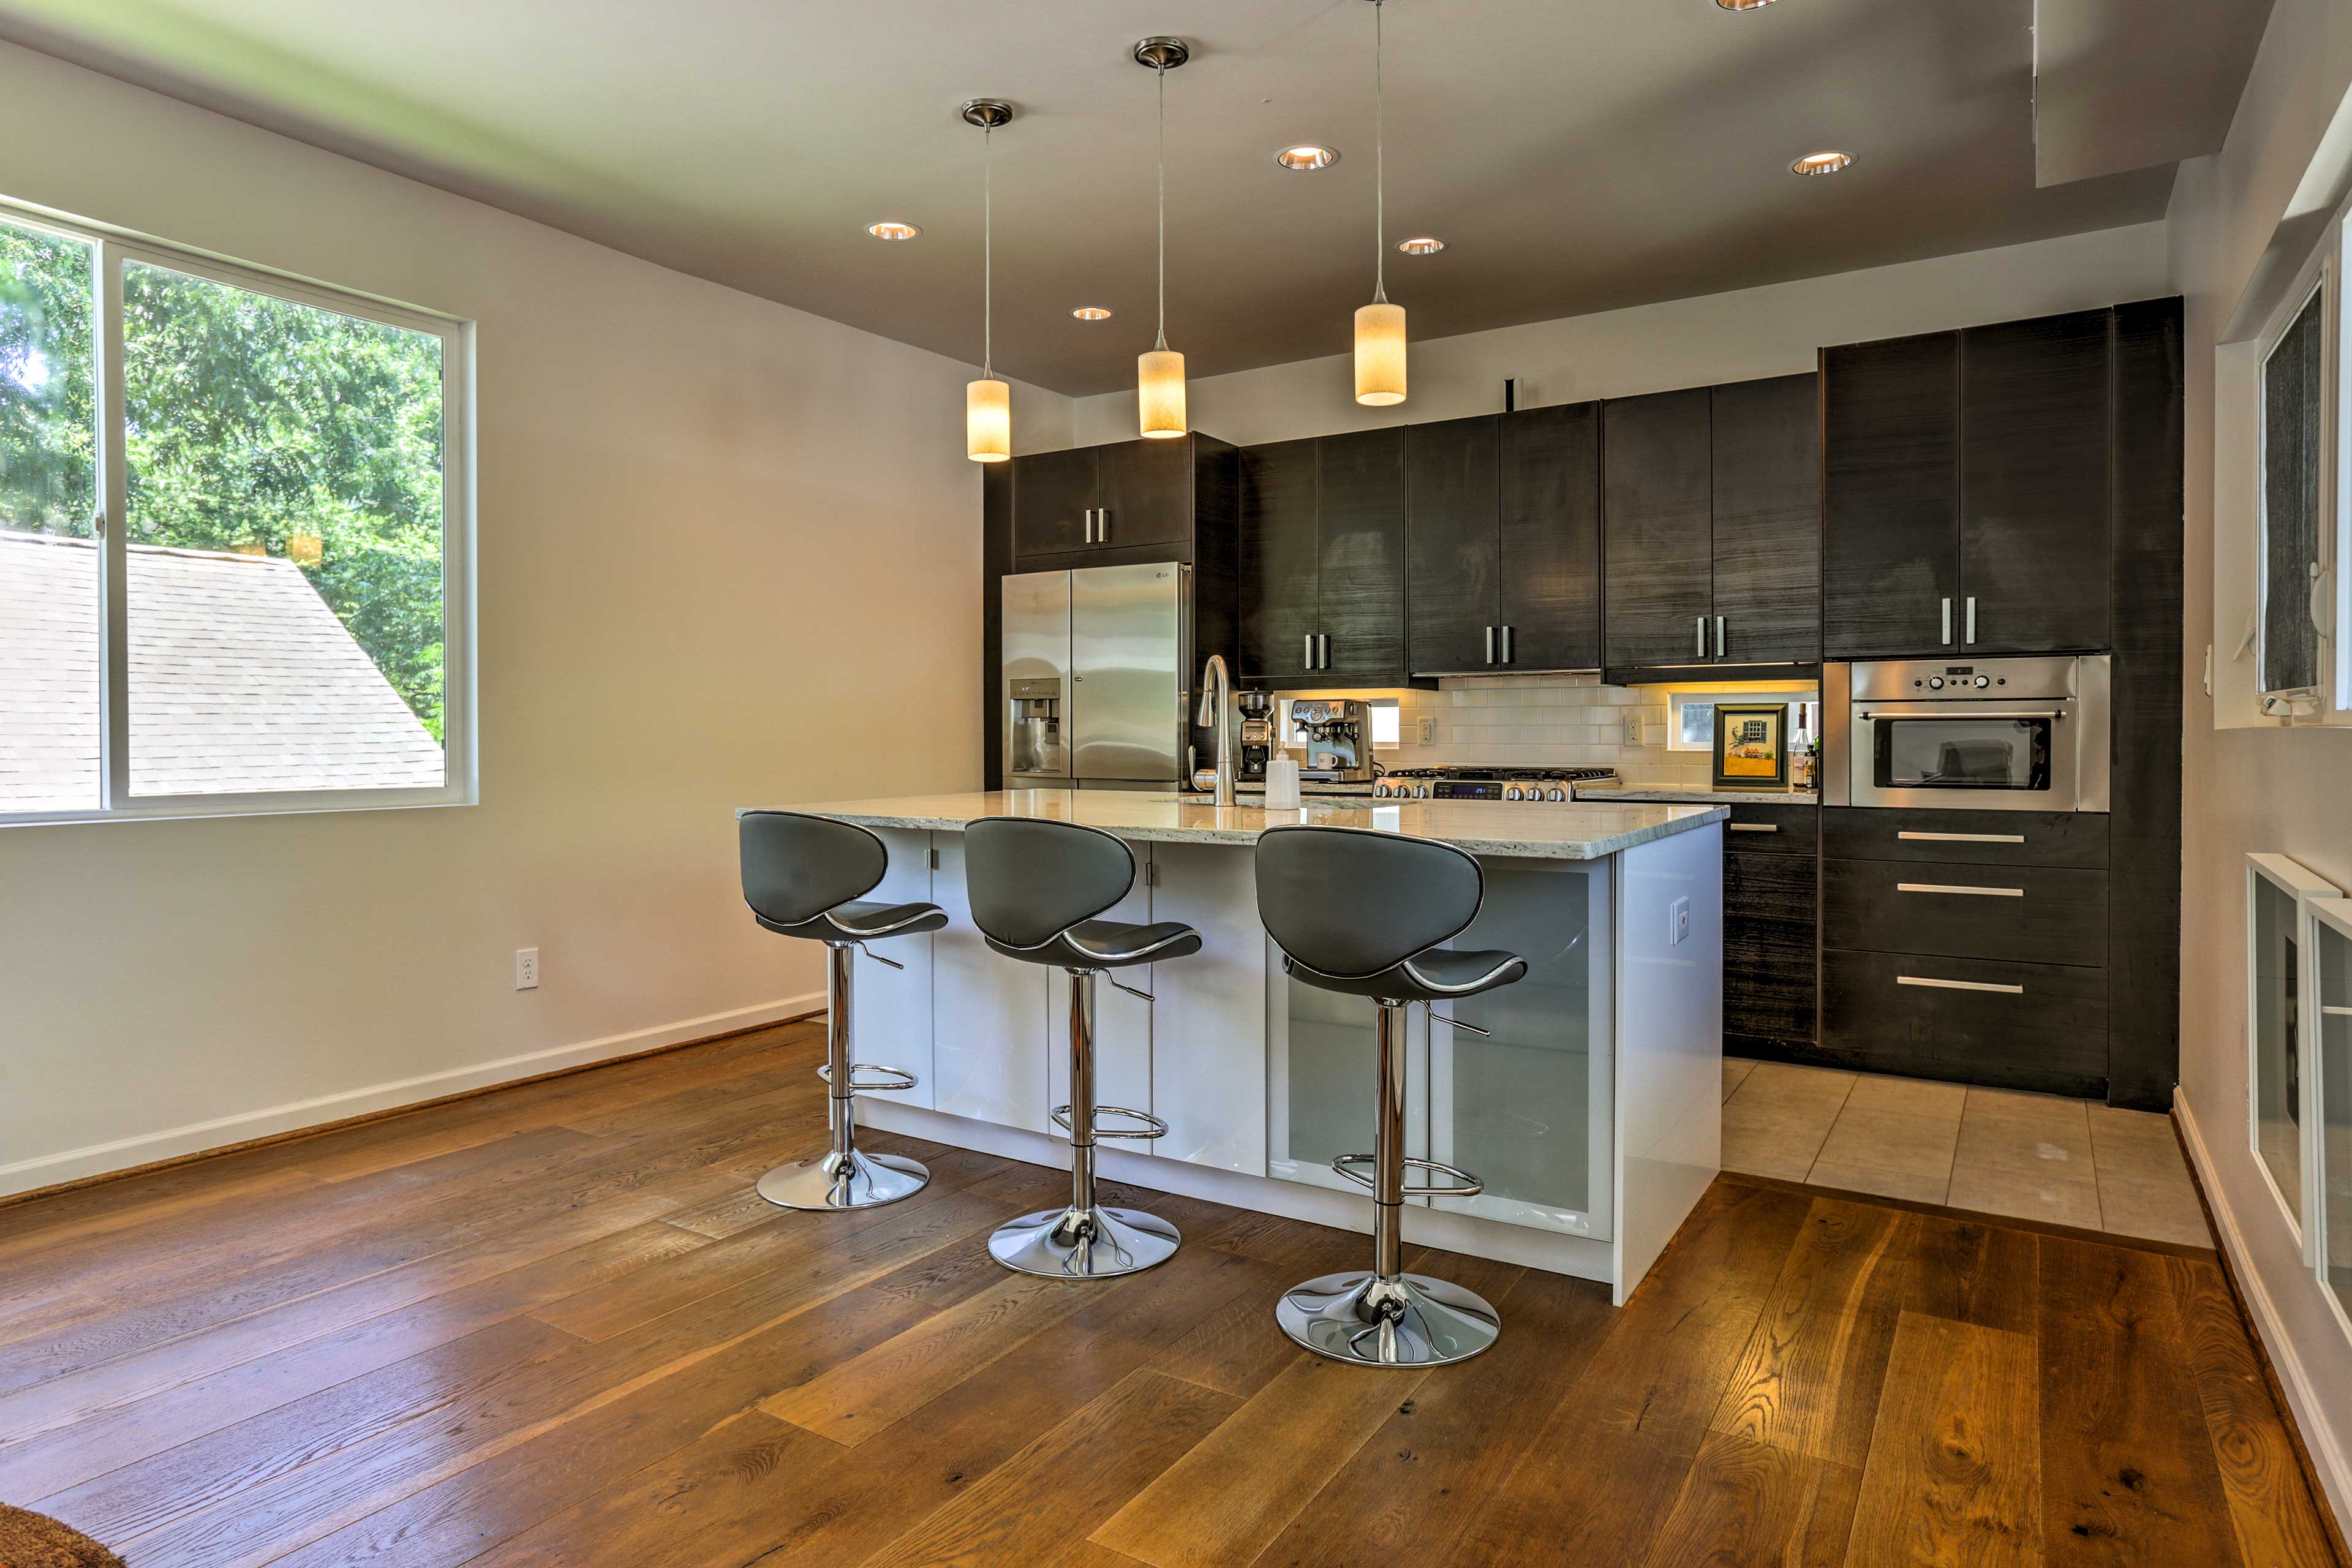 The space features top-of-the-line appliances and a sleek dining bar.